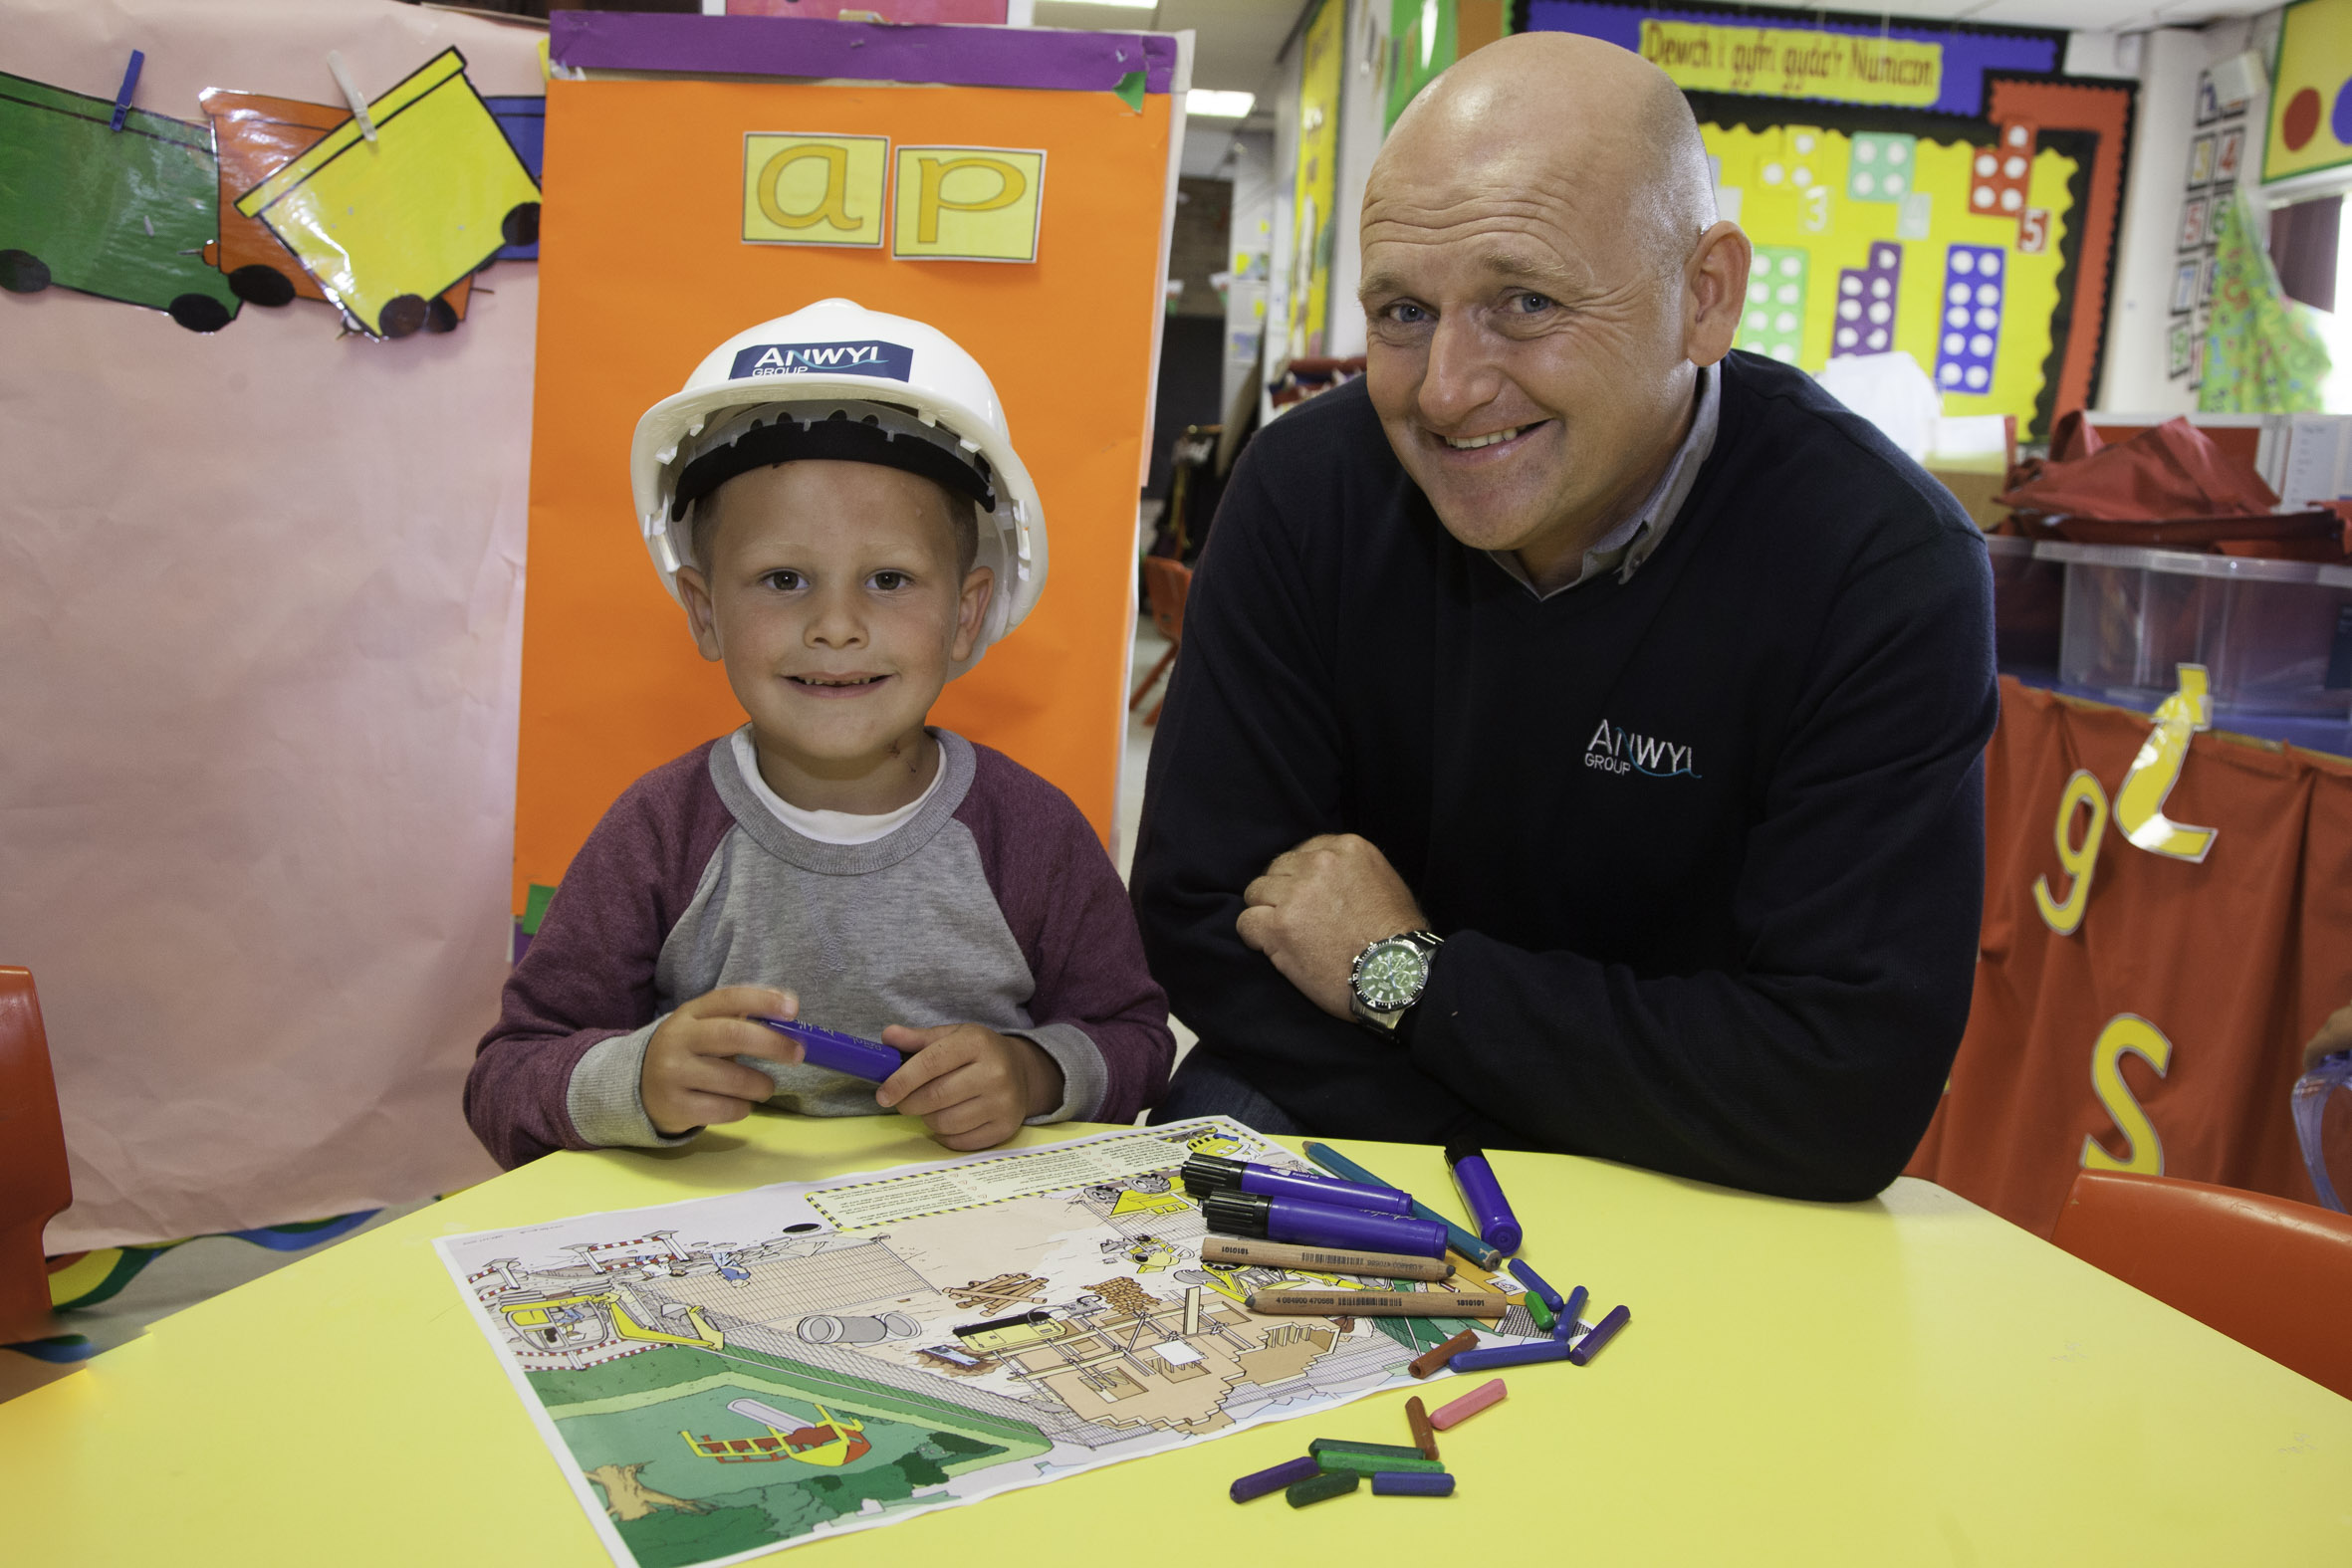 Anwyl  visit to Ysgol Eifion Wyn, Porthmadog to give  safety talks and hazard spotting games. Pictured enjoying the hazard spotting game is pupil Jay Humphreys with Anwyl site manager Huw Hughes.